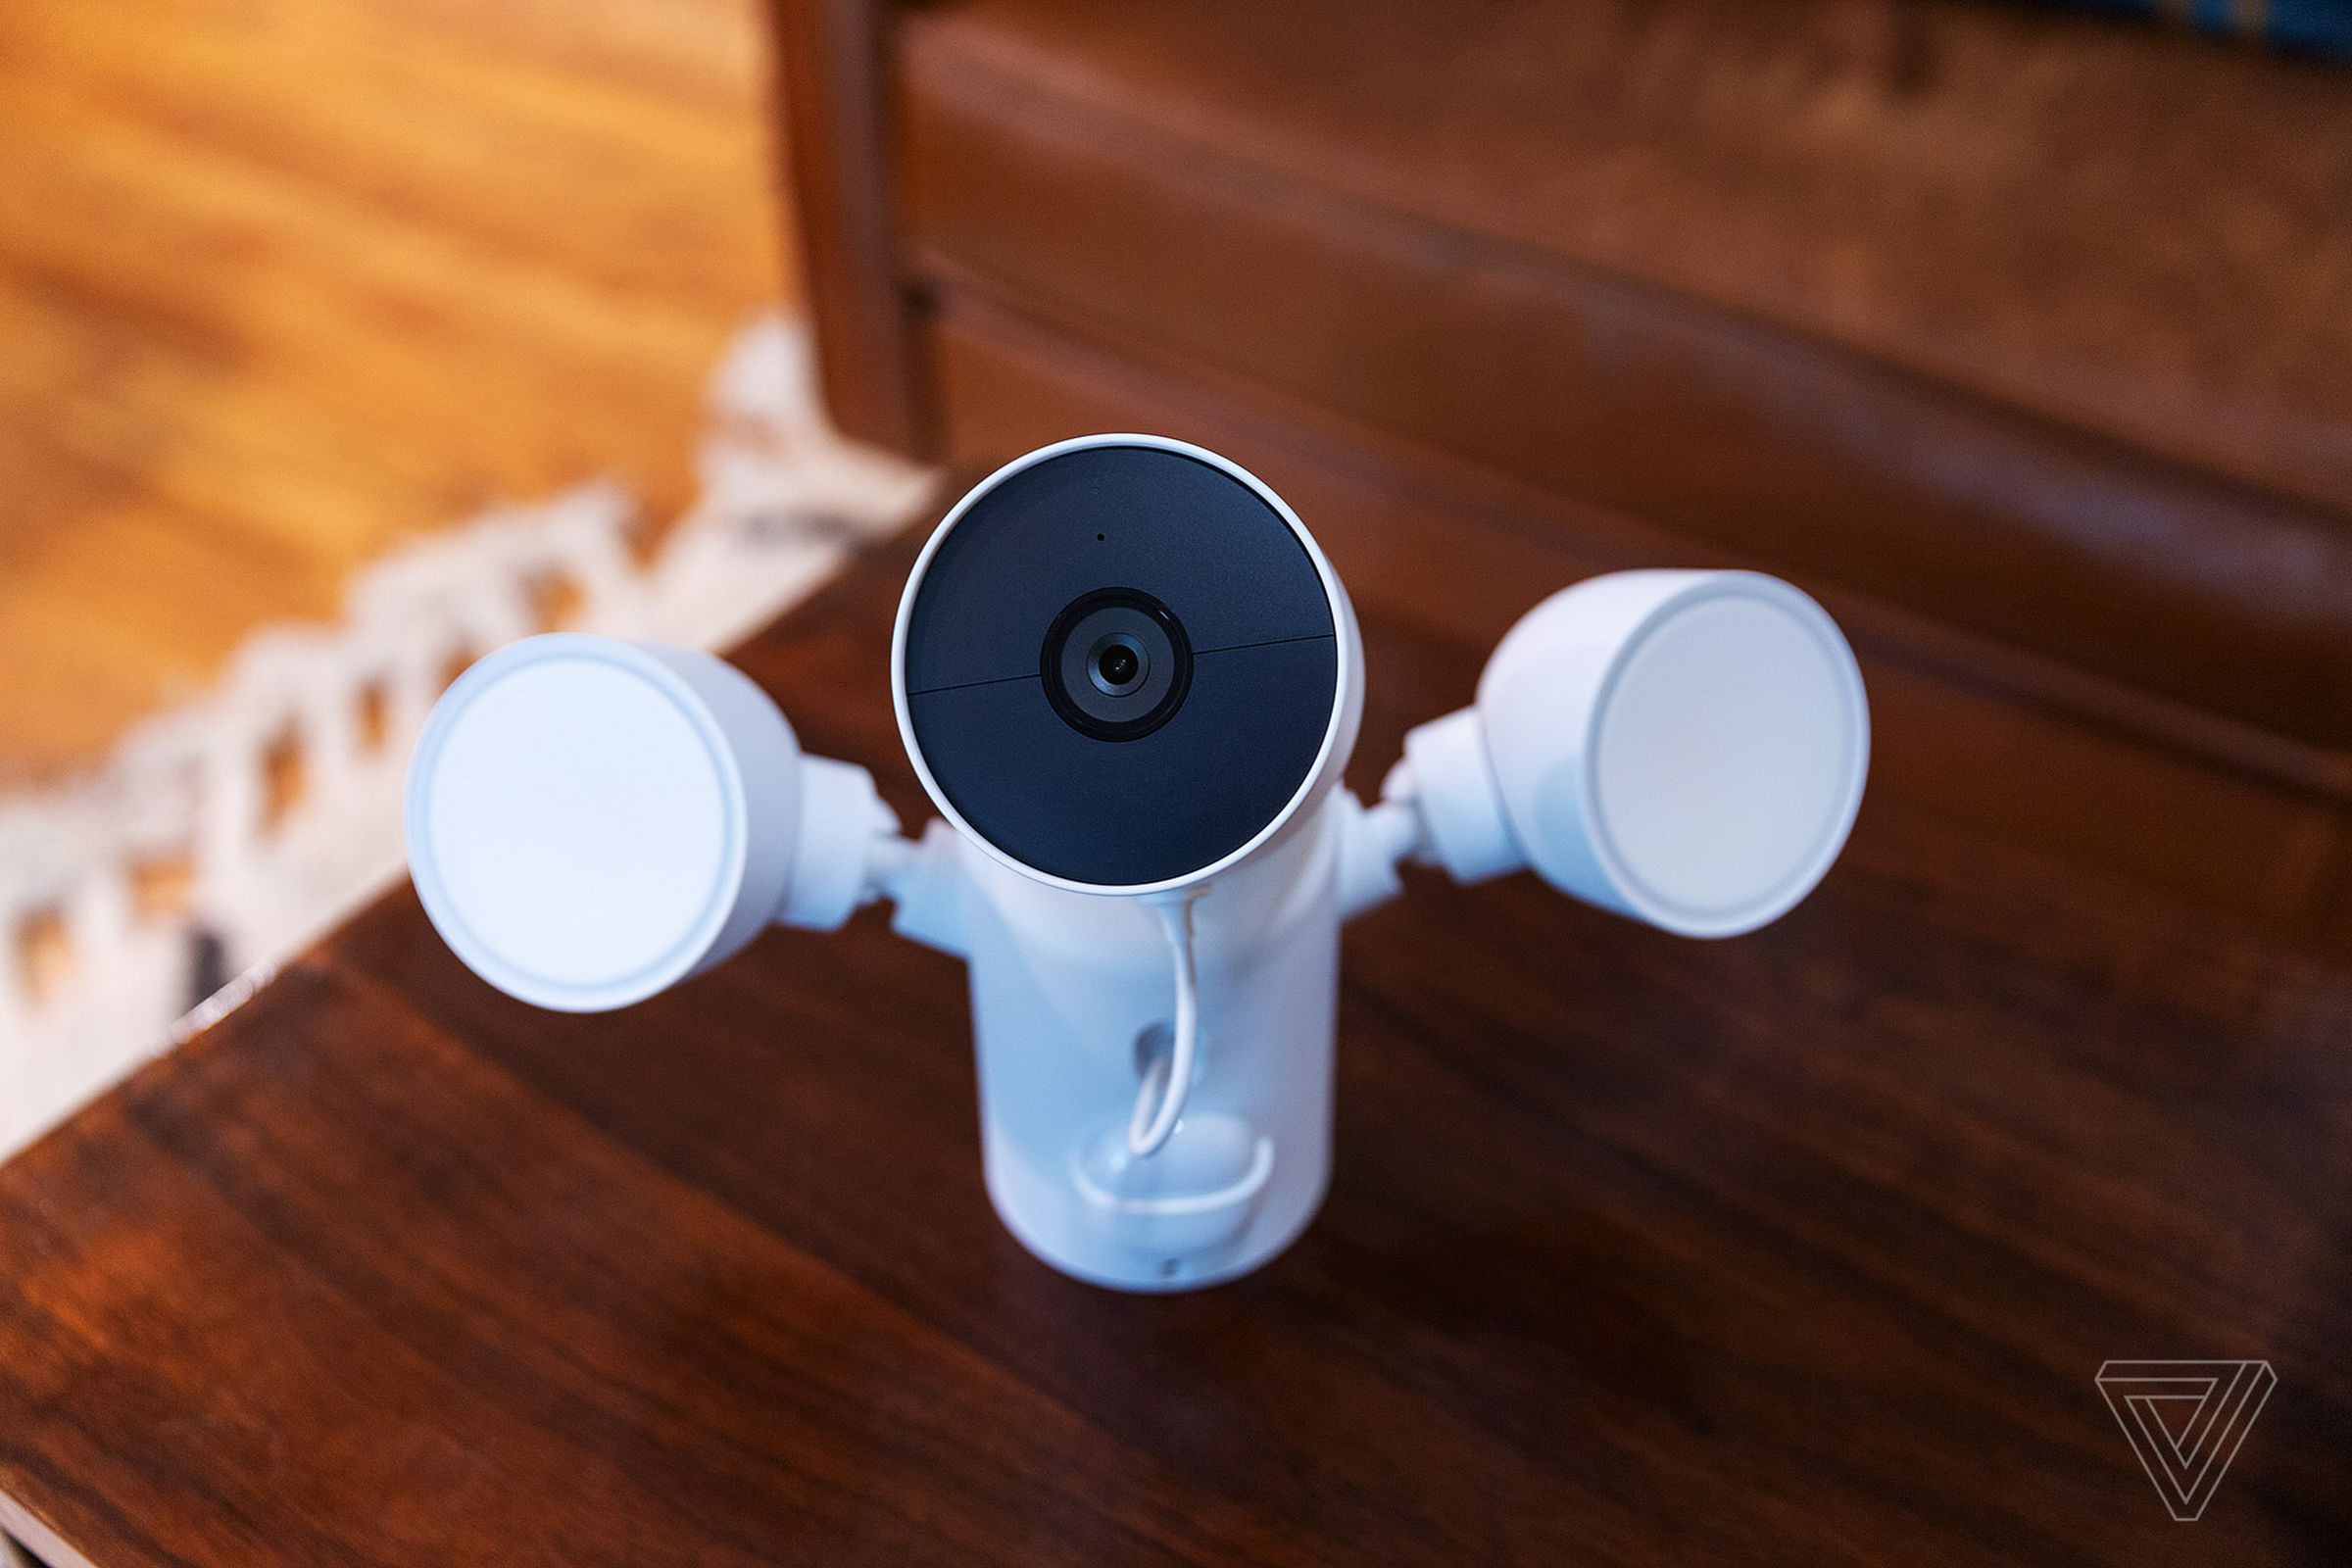 The Google Nest floodlight is essentially the same camera as the Nest Cam, but here, it’s magnetically attached to a wired base with two positionable lights.